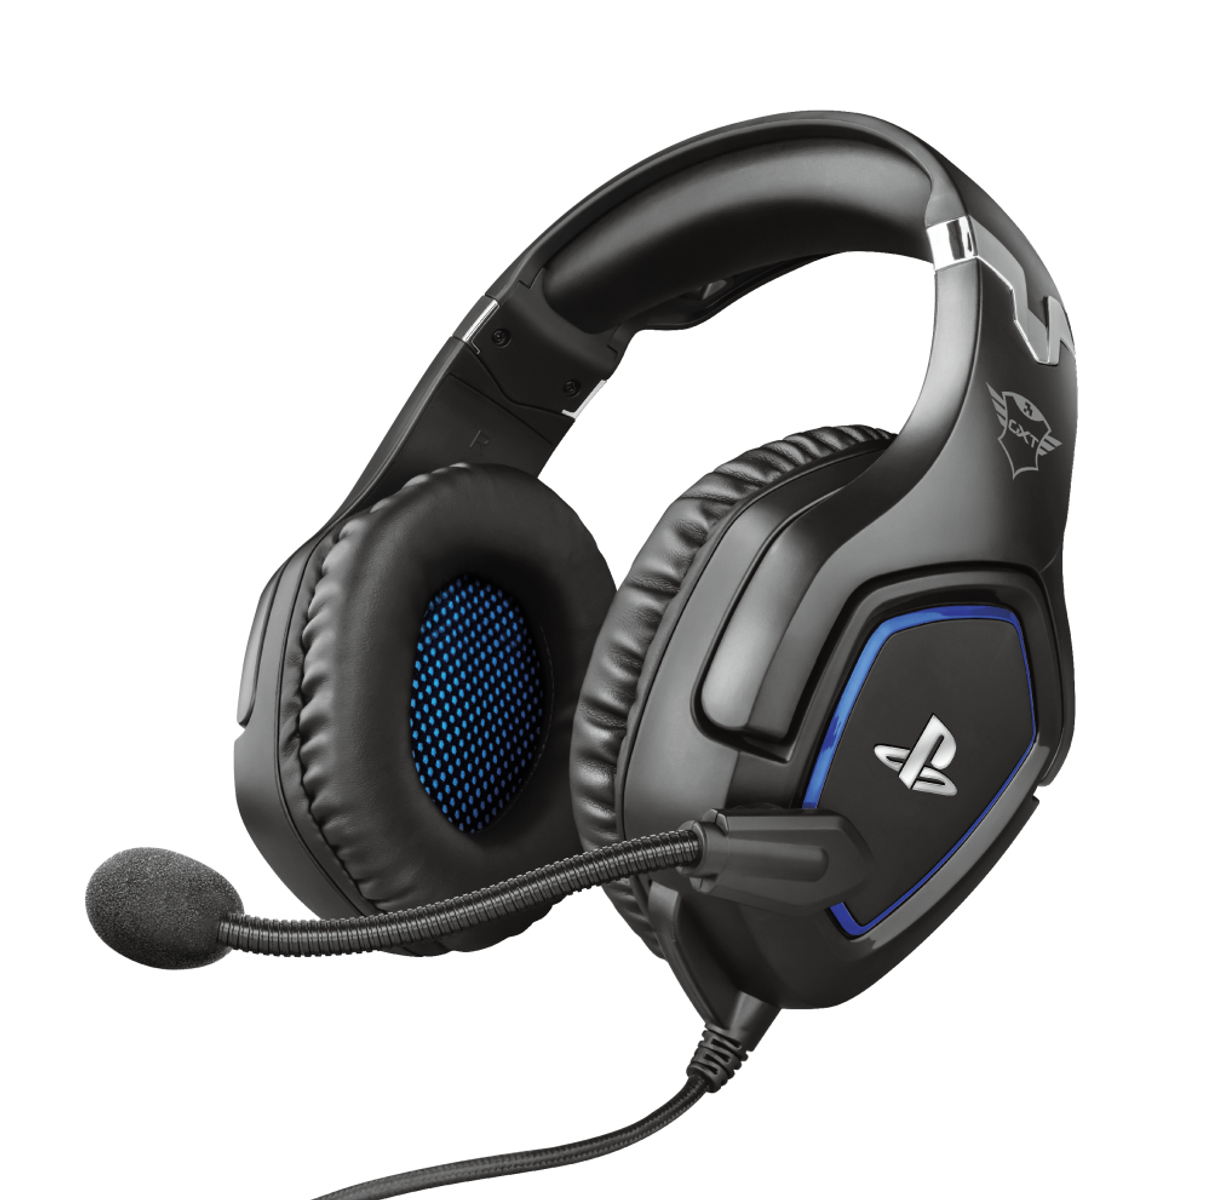 Over-ear Headset 23530 SONY GXT HEADSET GAMING Gaming LIC., Schwarz TRUST PS4 FORZE 488